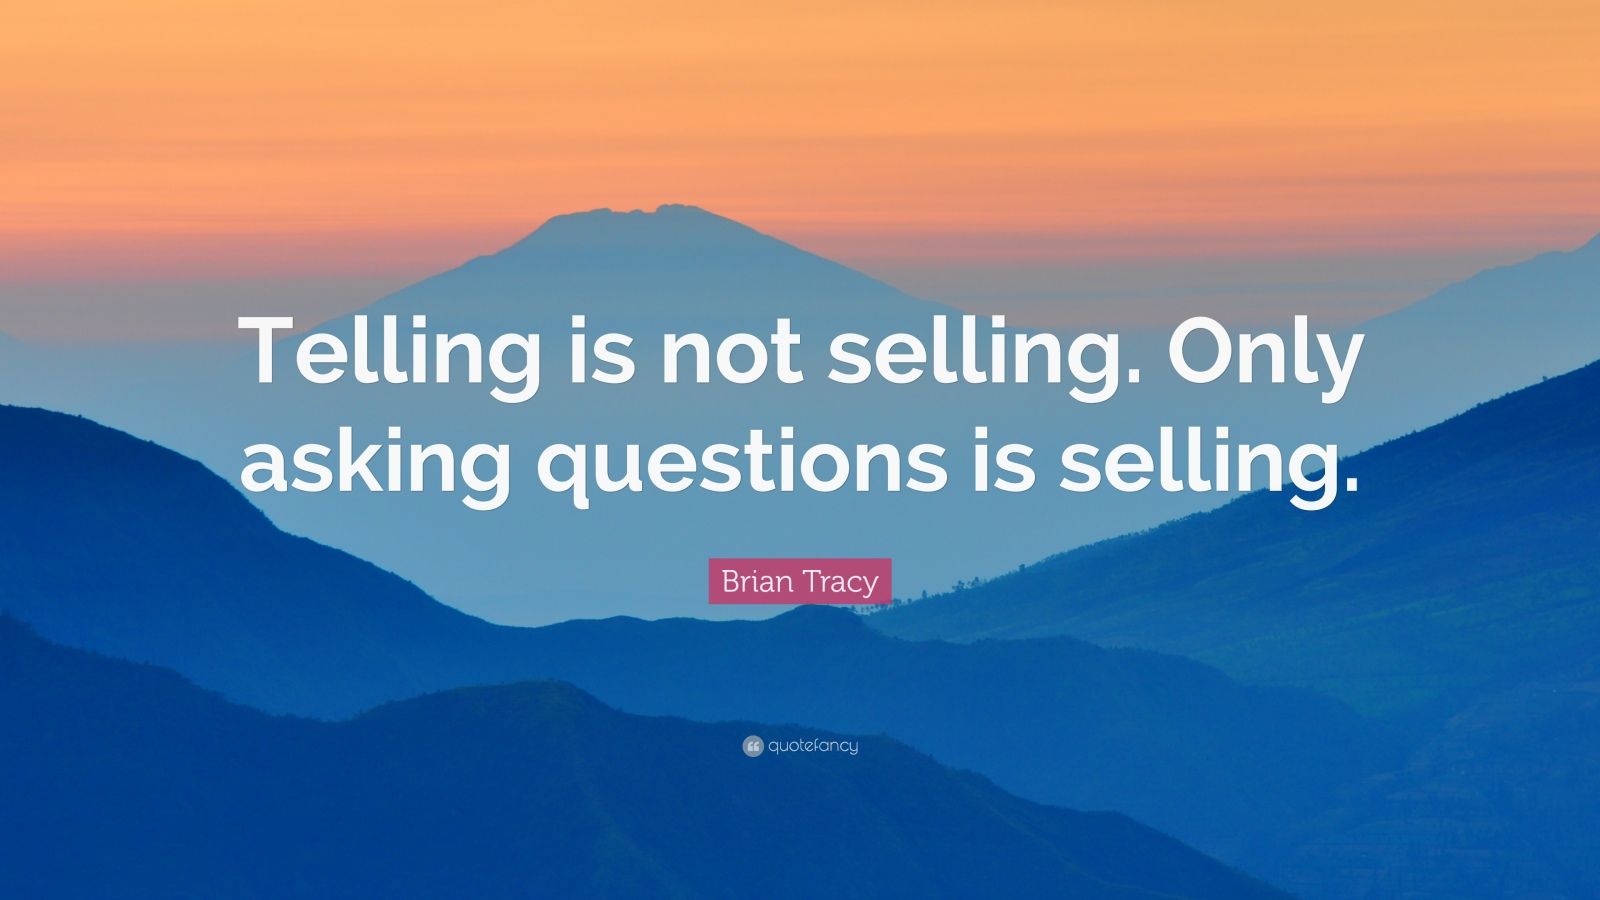 Brian Tracy Quote: “Telling is not selling. Only asking questions is